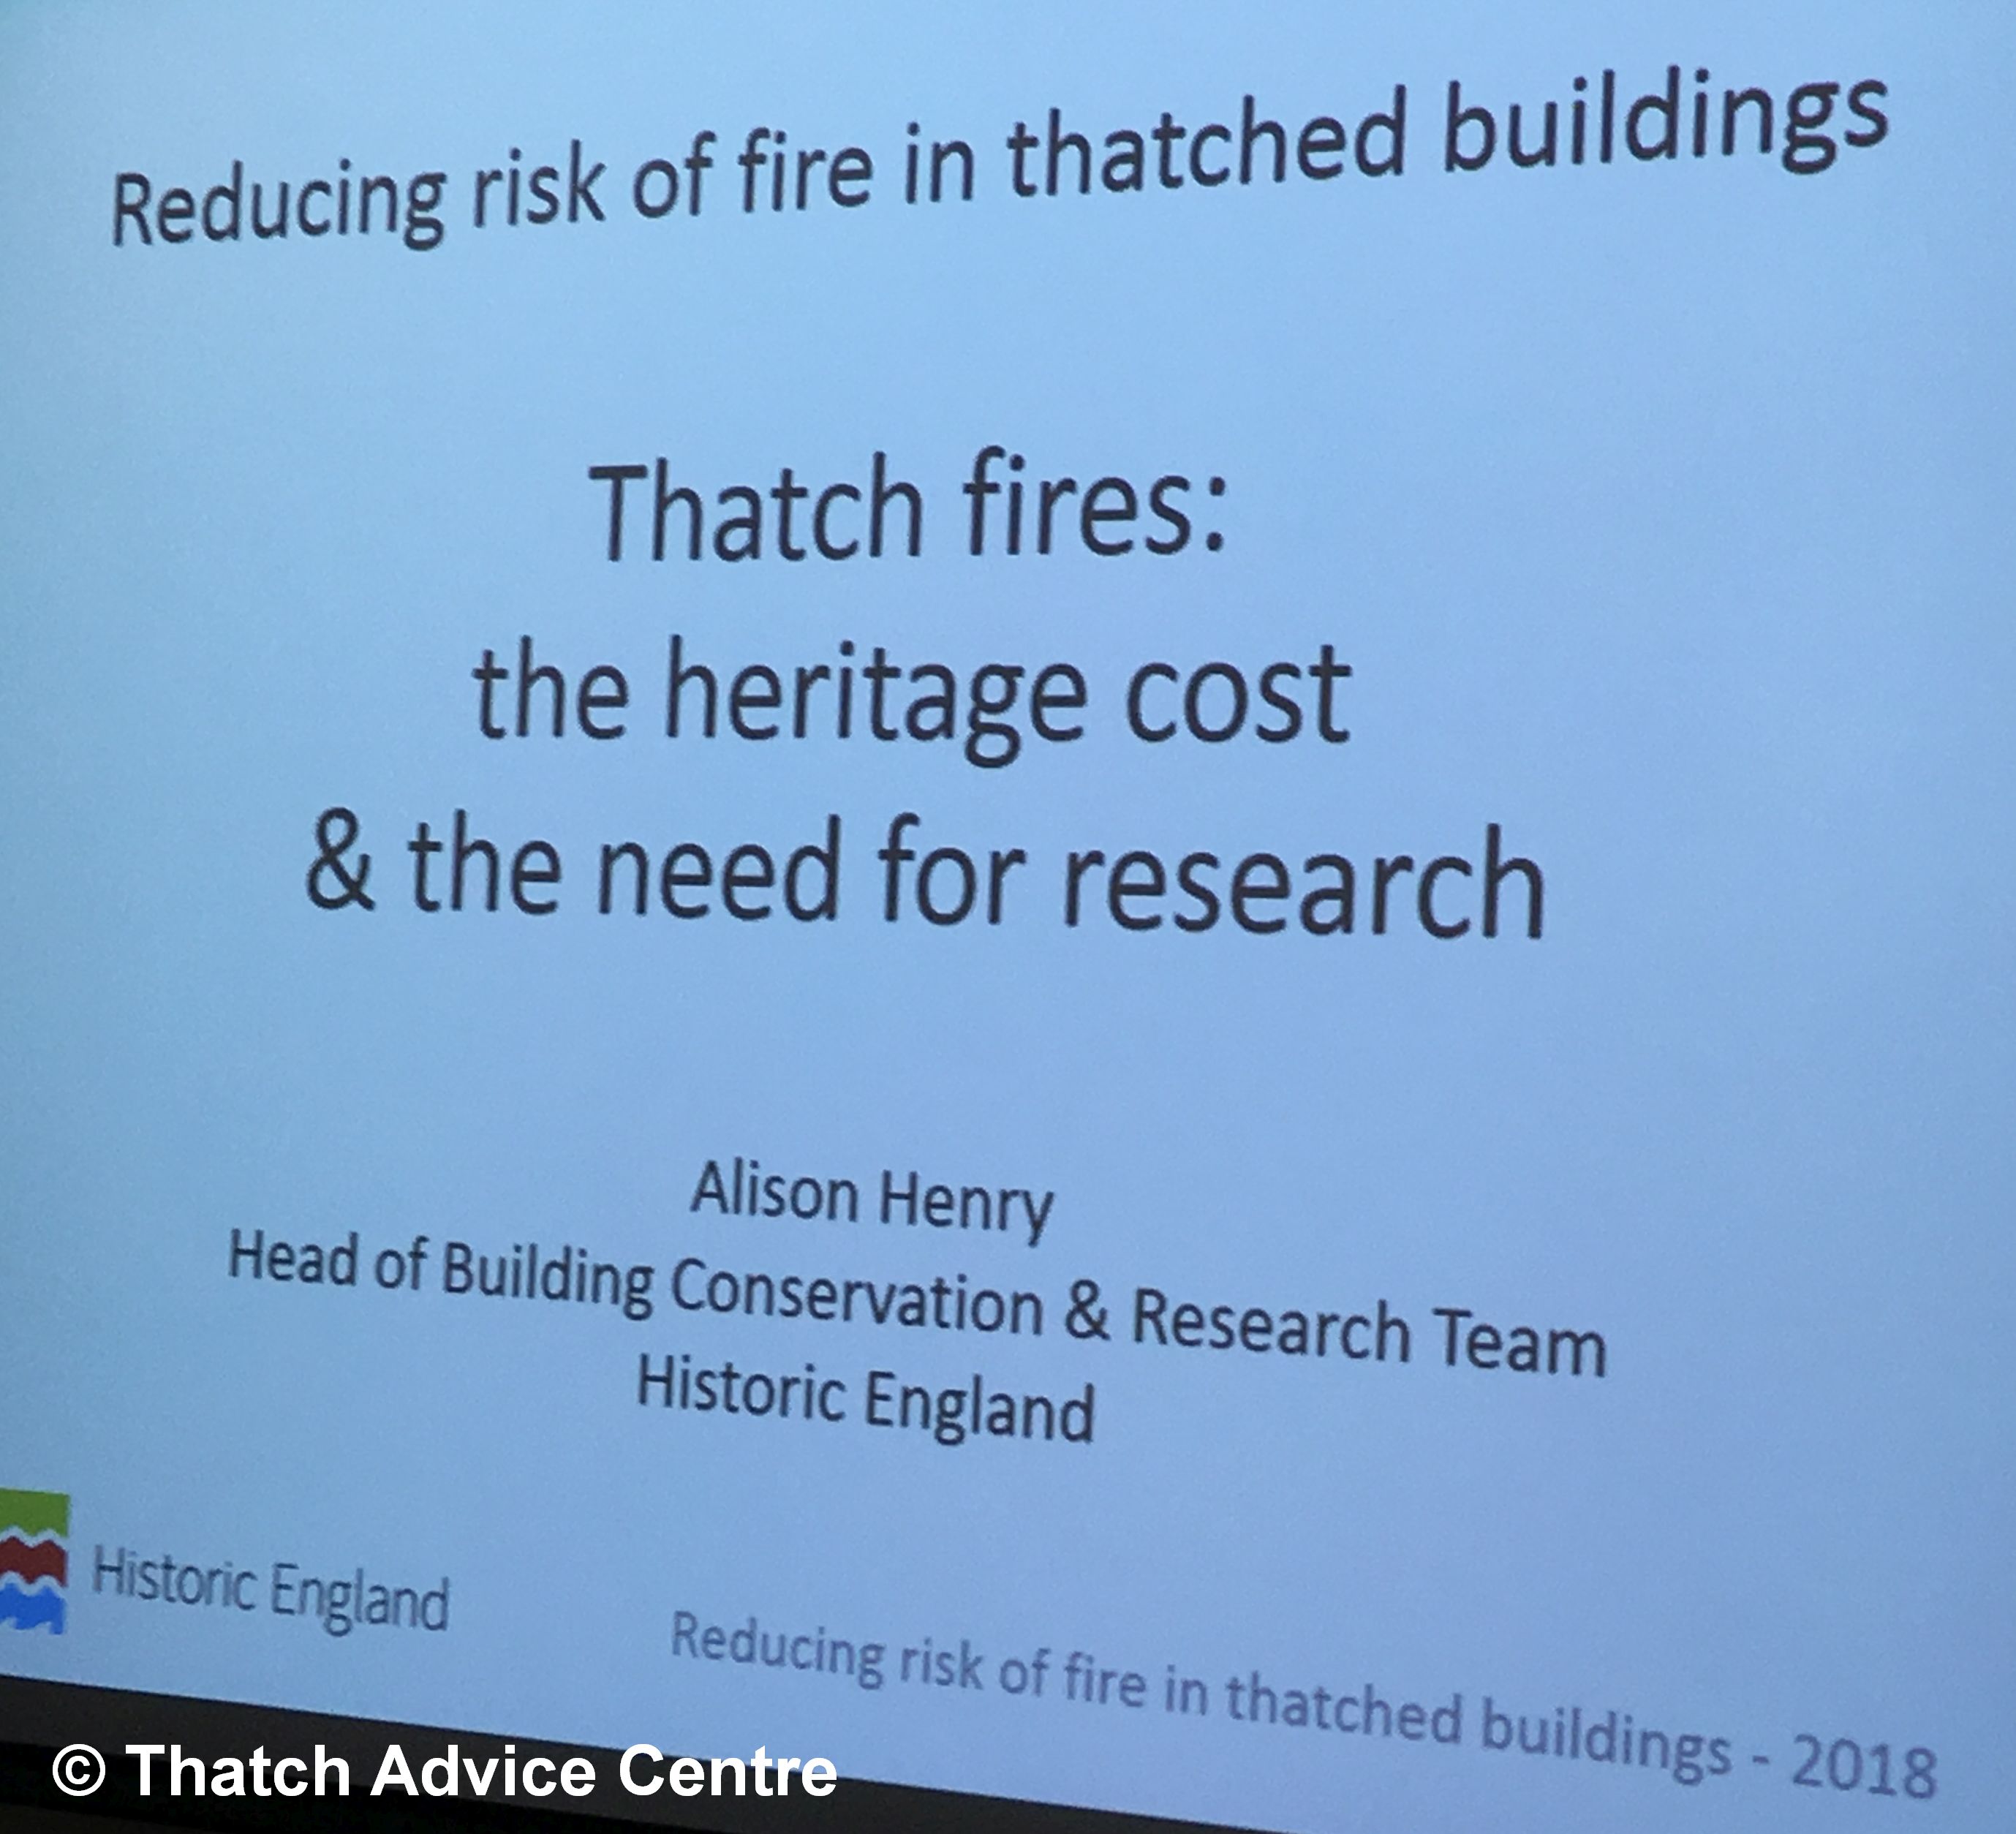 Thatch Fire Seminar Nov 18 - thatch Fires heritage perspective